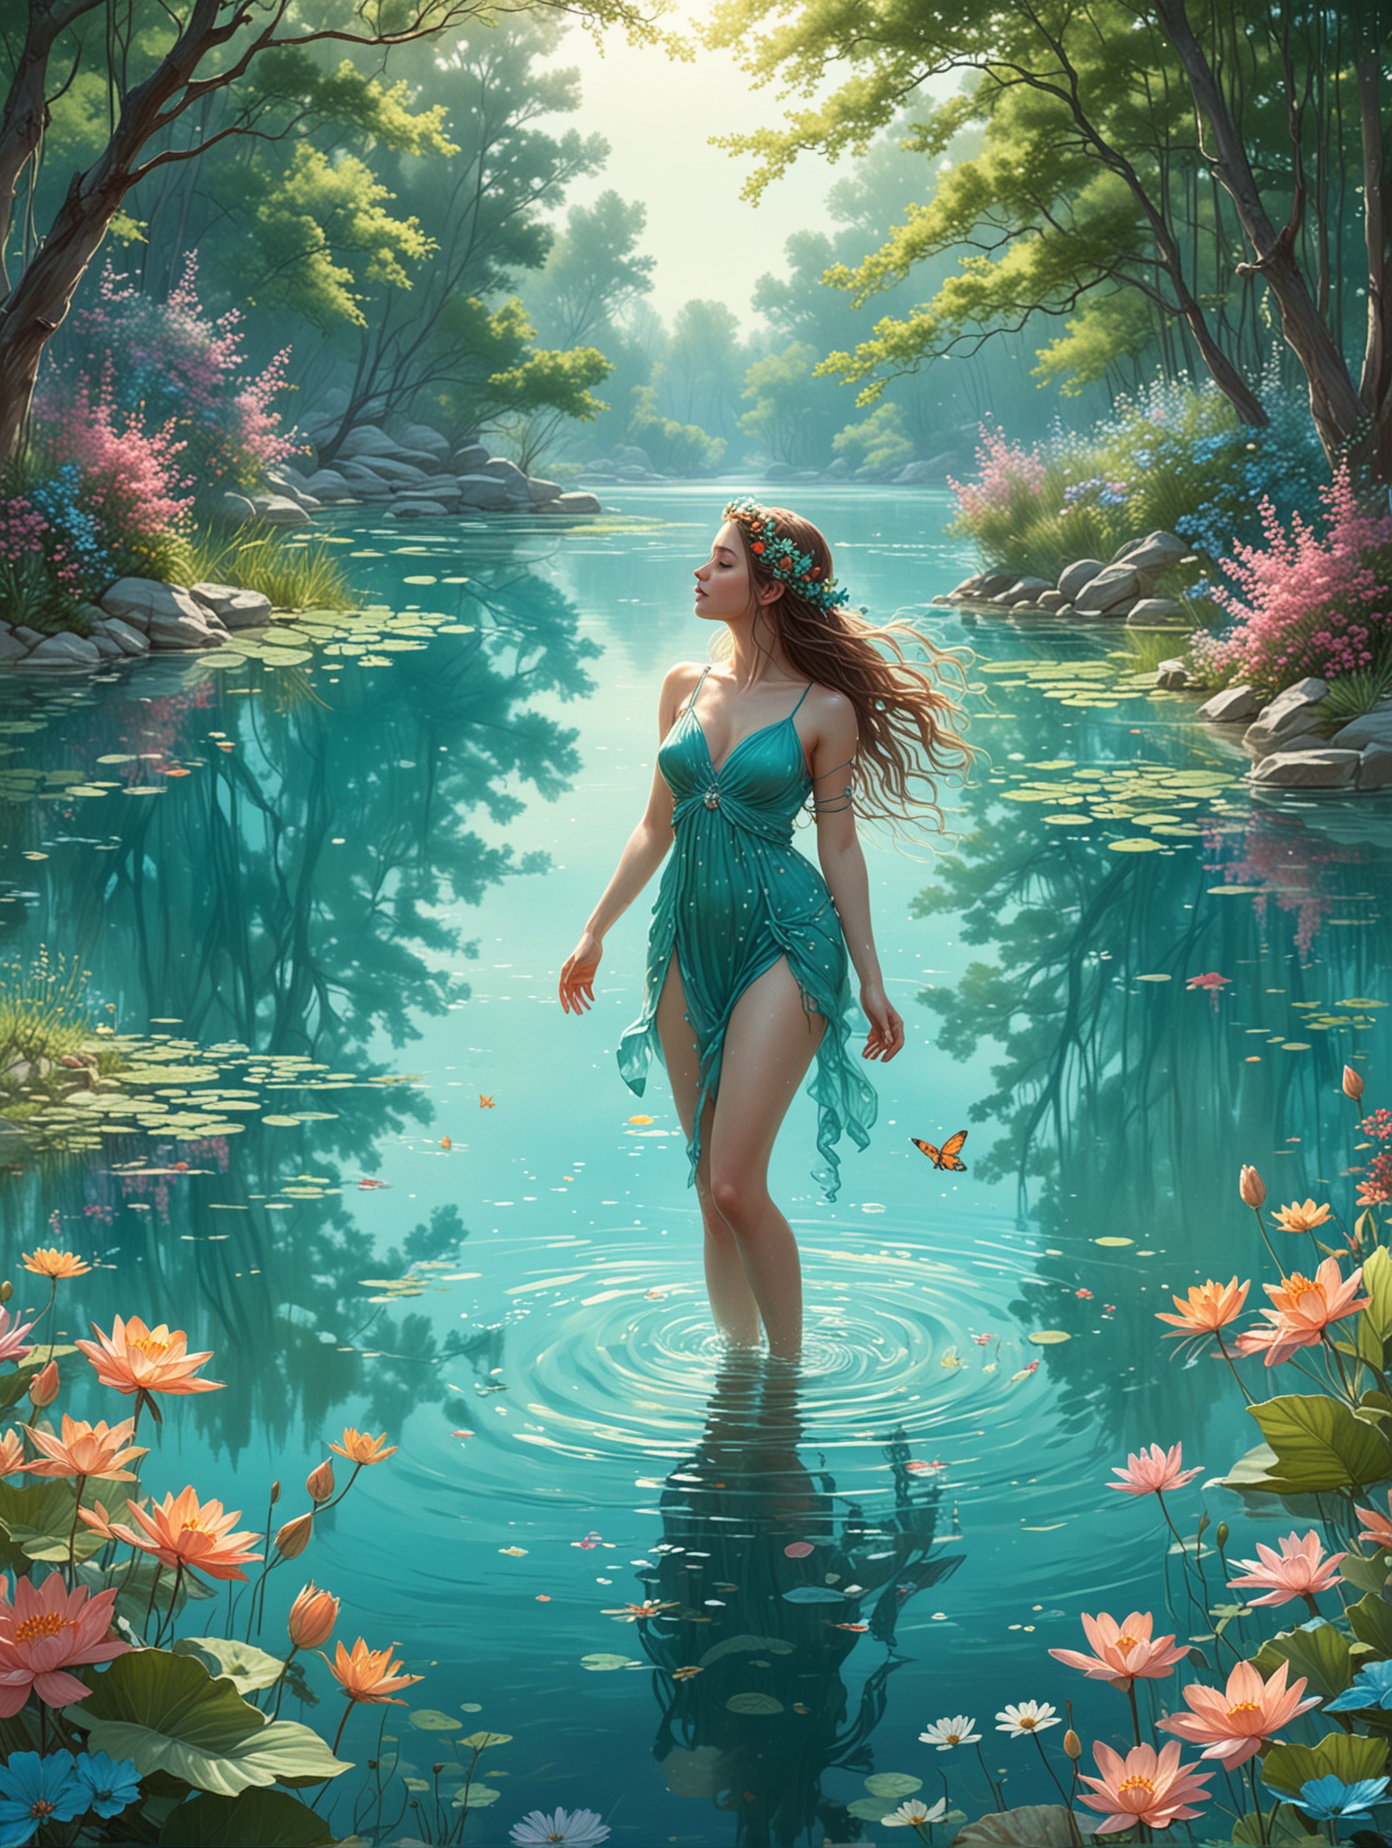 Enchanting Nymph by a Radiant Turquoise Lake amidst Lush Nature